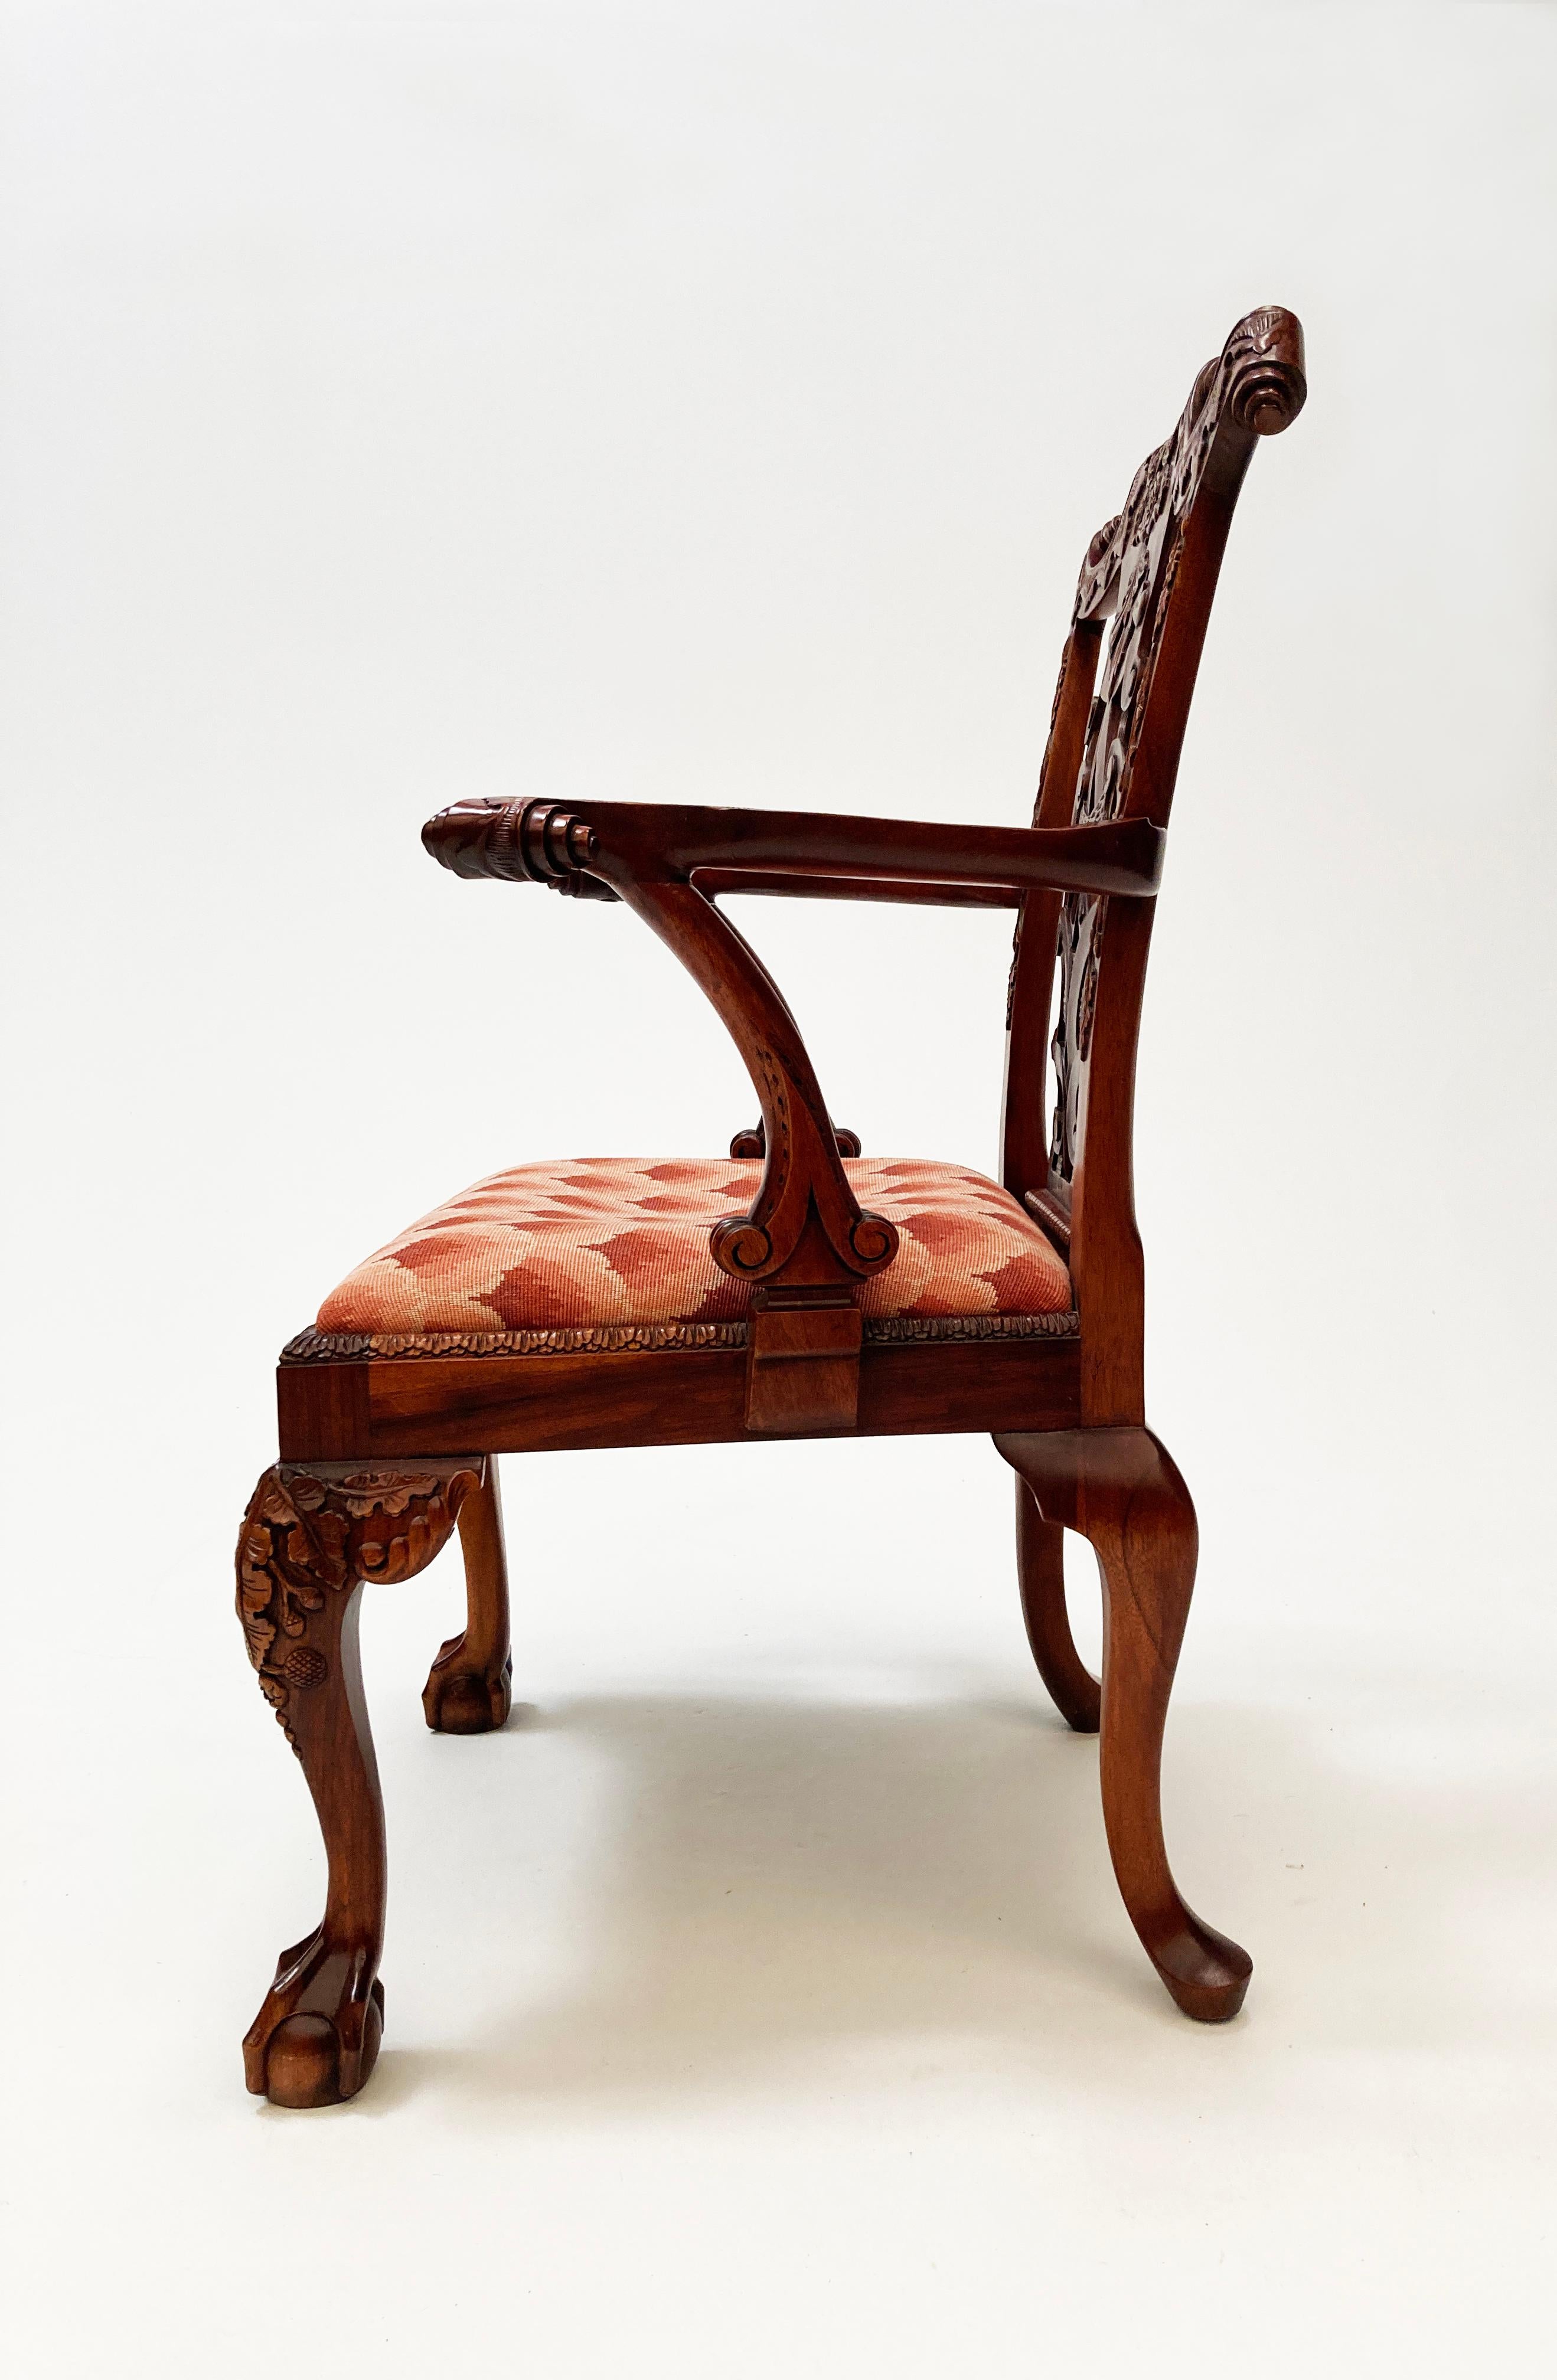 Early 20th Century Mahogany Irish Antique Replica Chippendale Chairs- Set of 2 In Good Condition For Sale In Louisville, KY